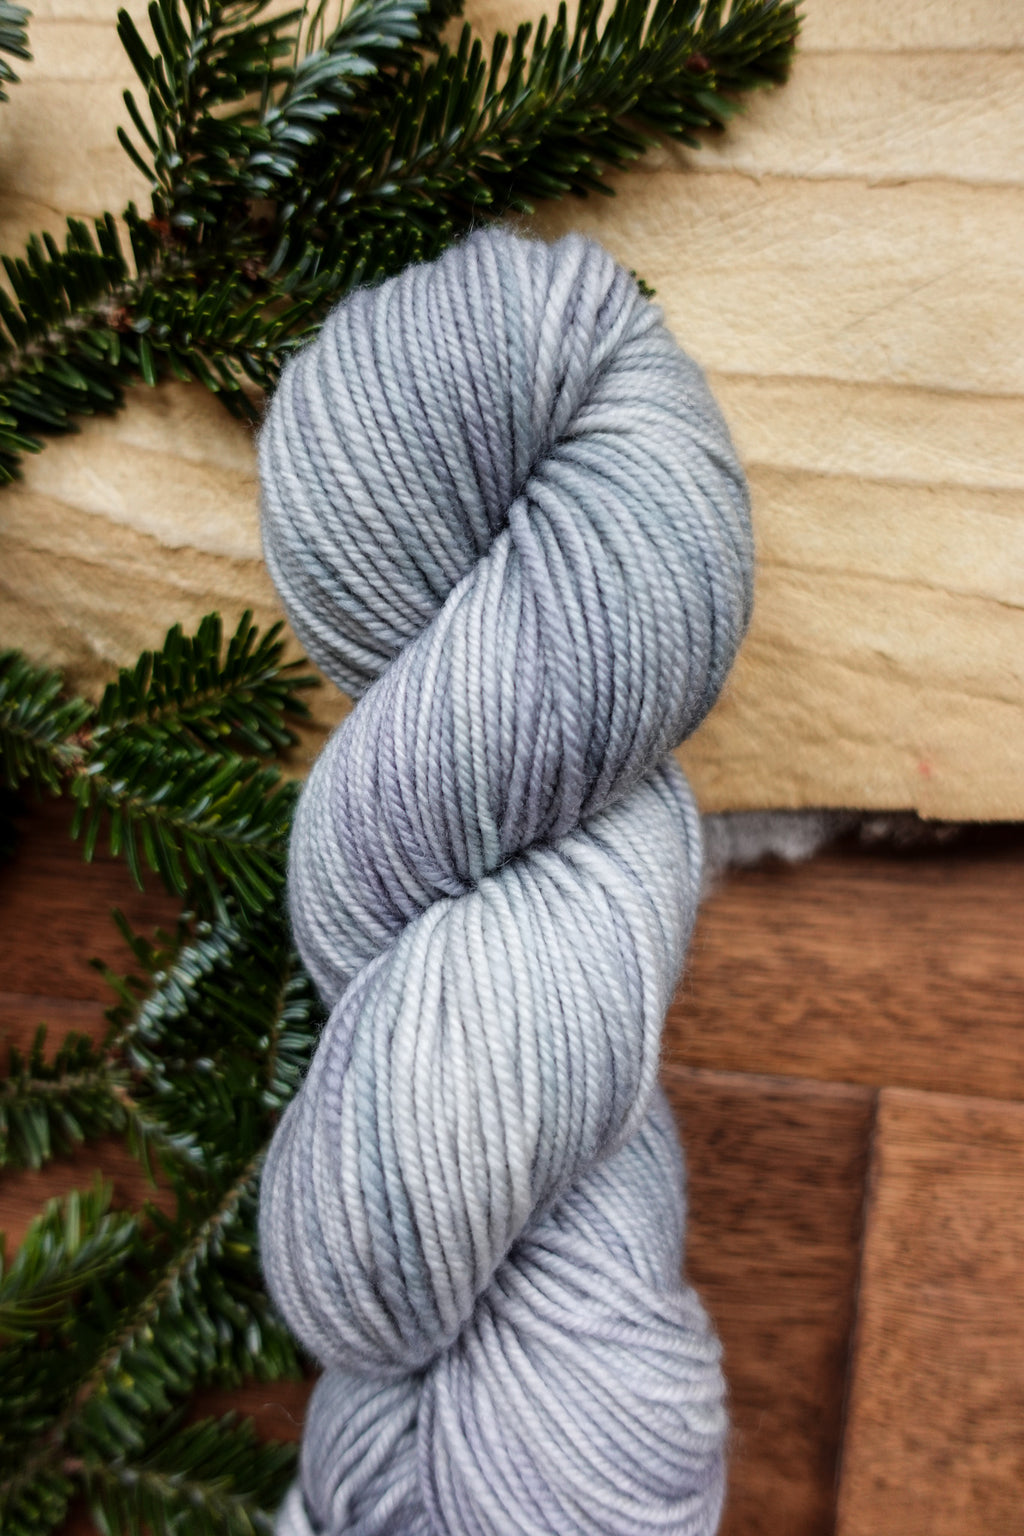 A worsted weight skein of yarn has been hand dyed a light grey. It lays on a tabletop next to fir branches.